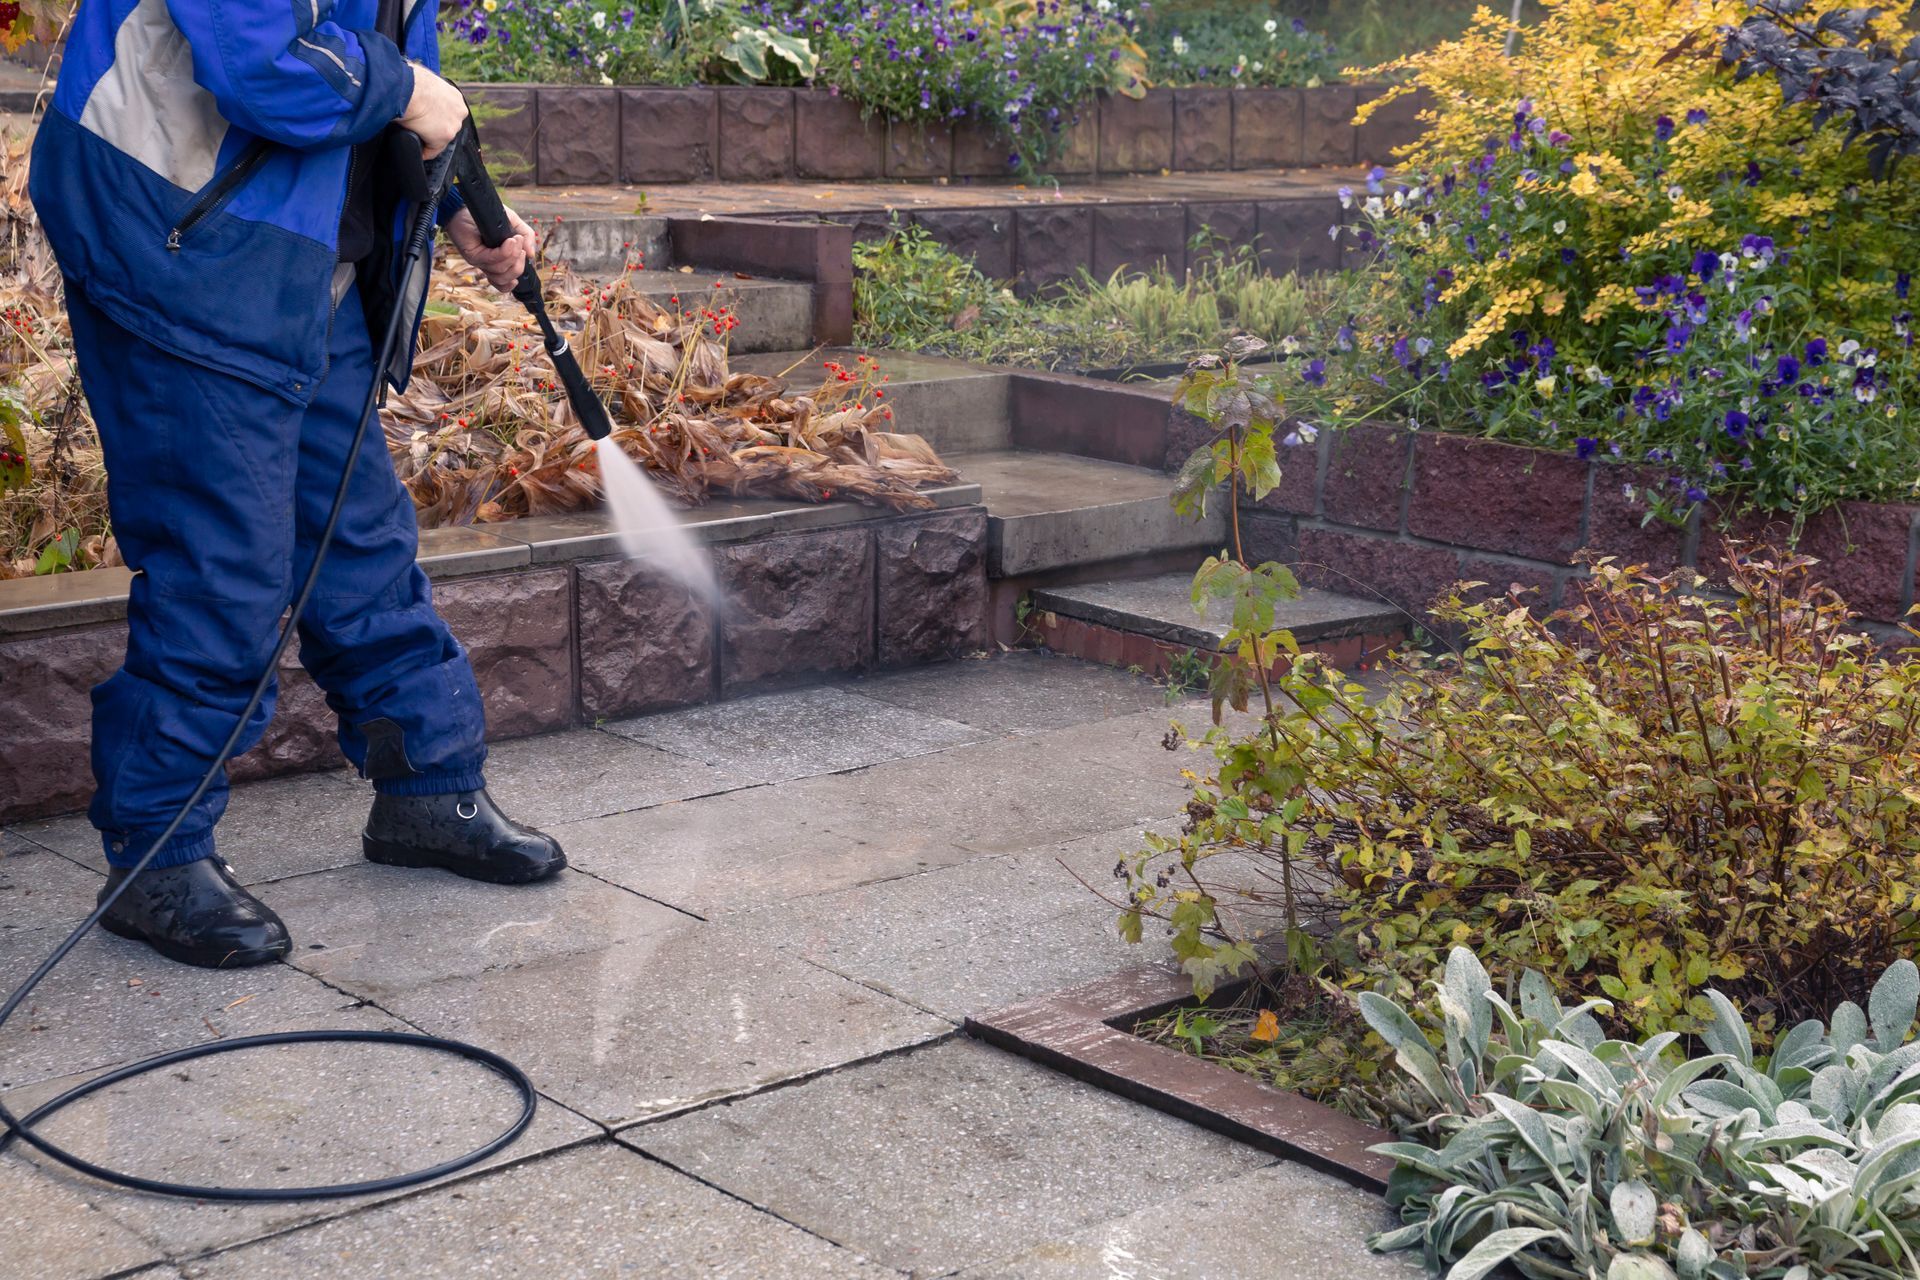 a man is using a high pressure washer to clean a concrete pathway